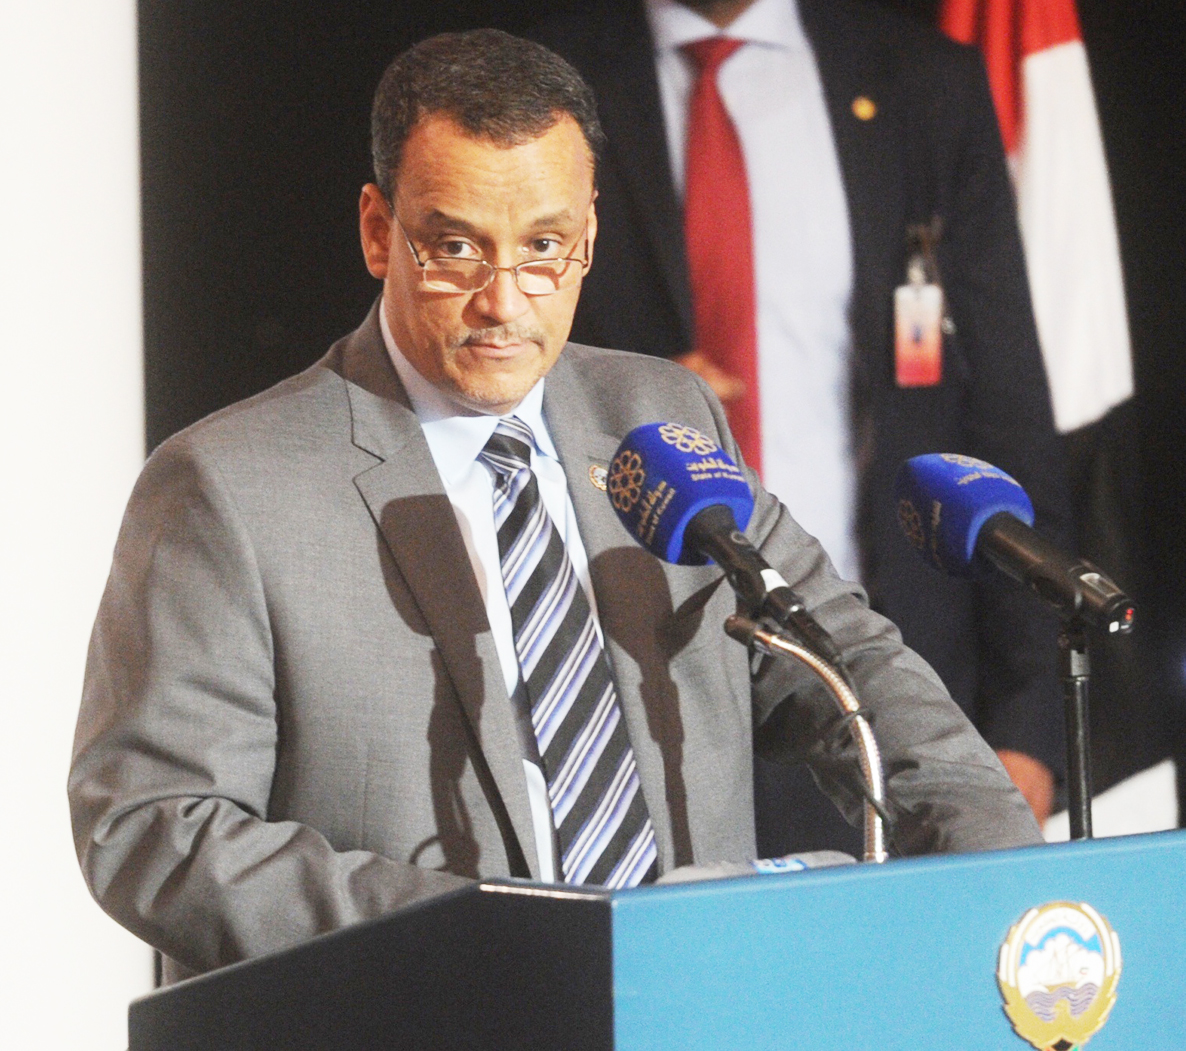 UN envoy to Yemen Ismail Ould Cheikh Ahmed